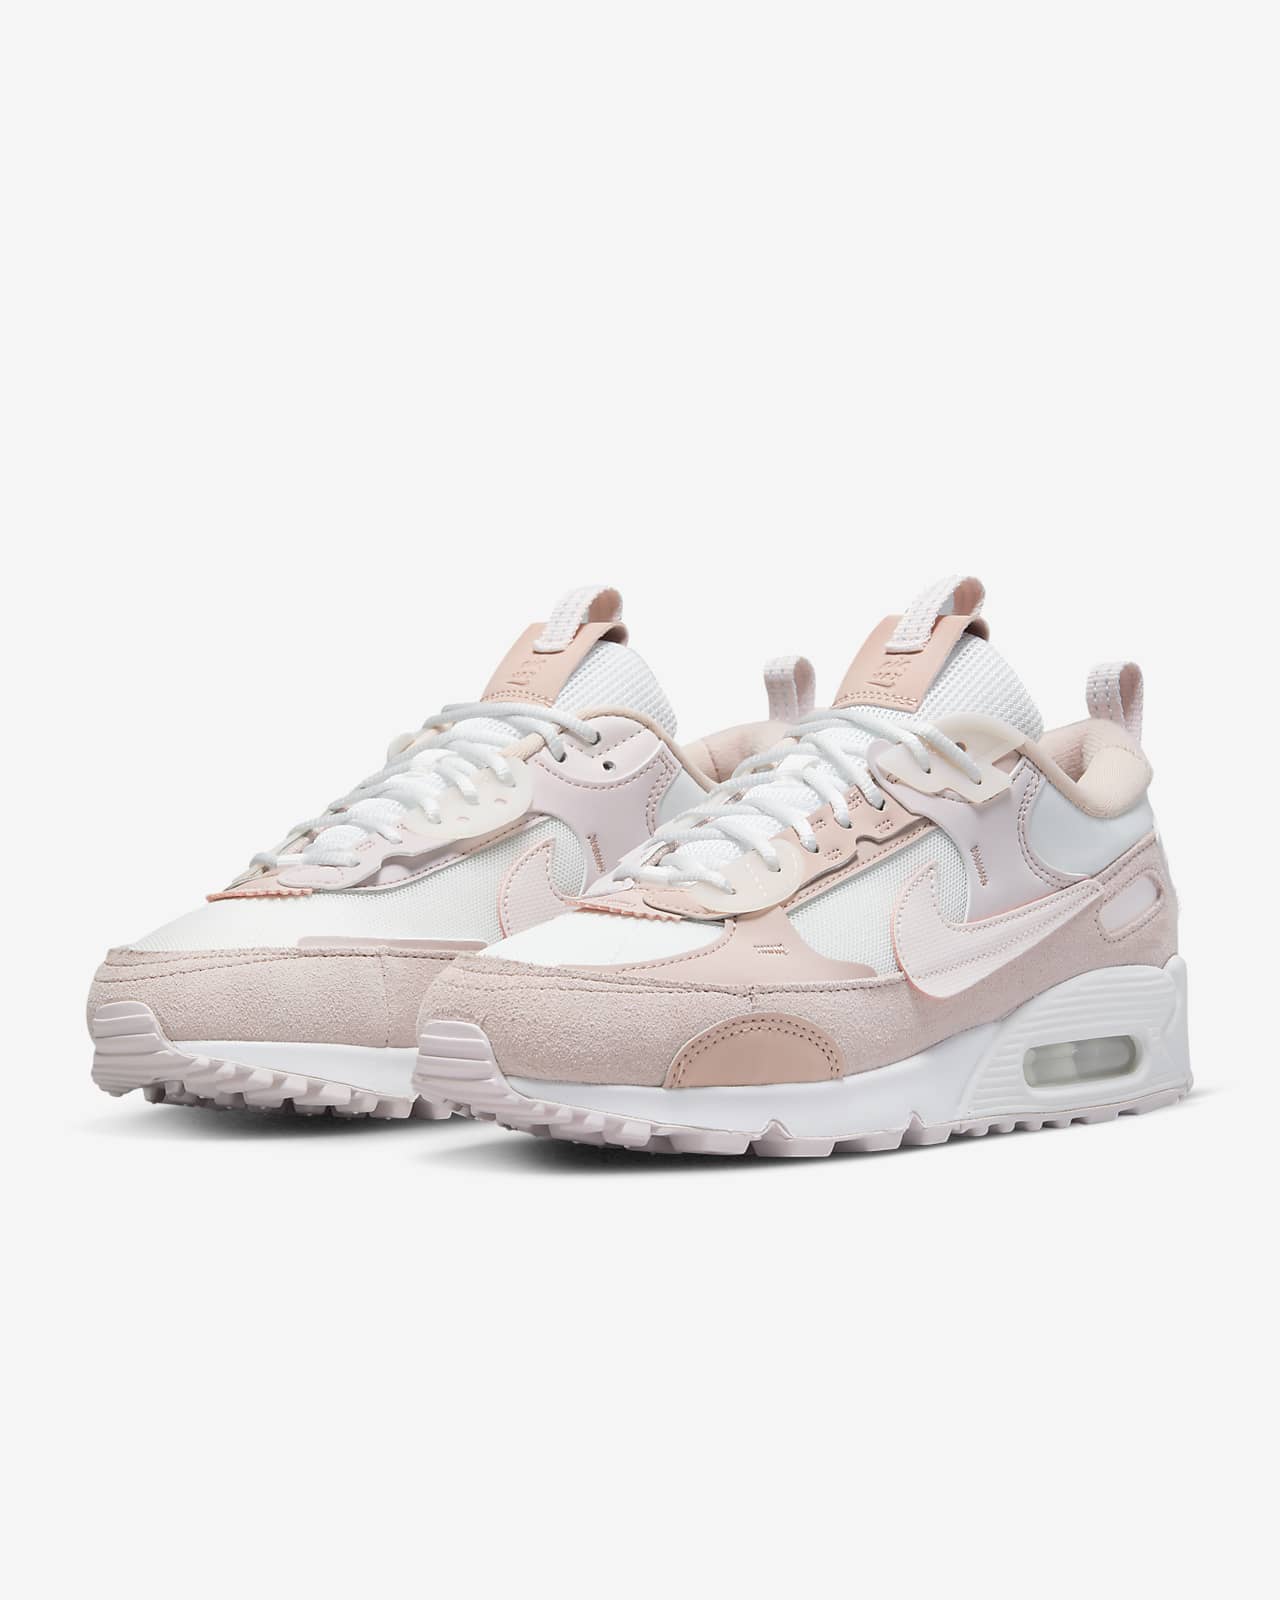 Nike Air Max Pink and White: Playful and Cute Sneakers for Women